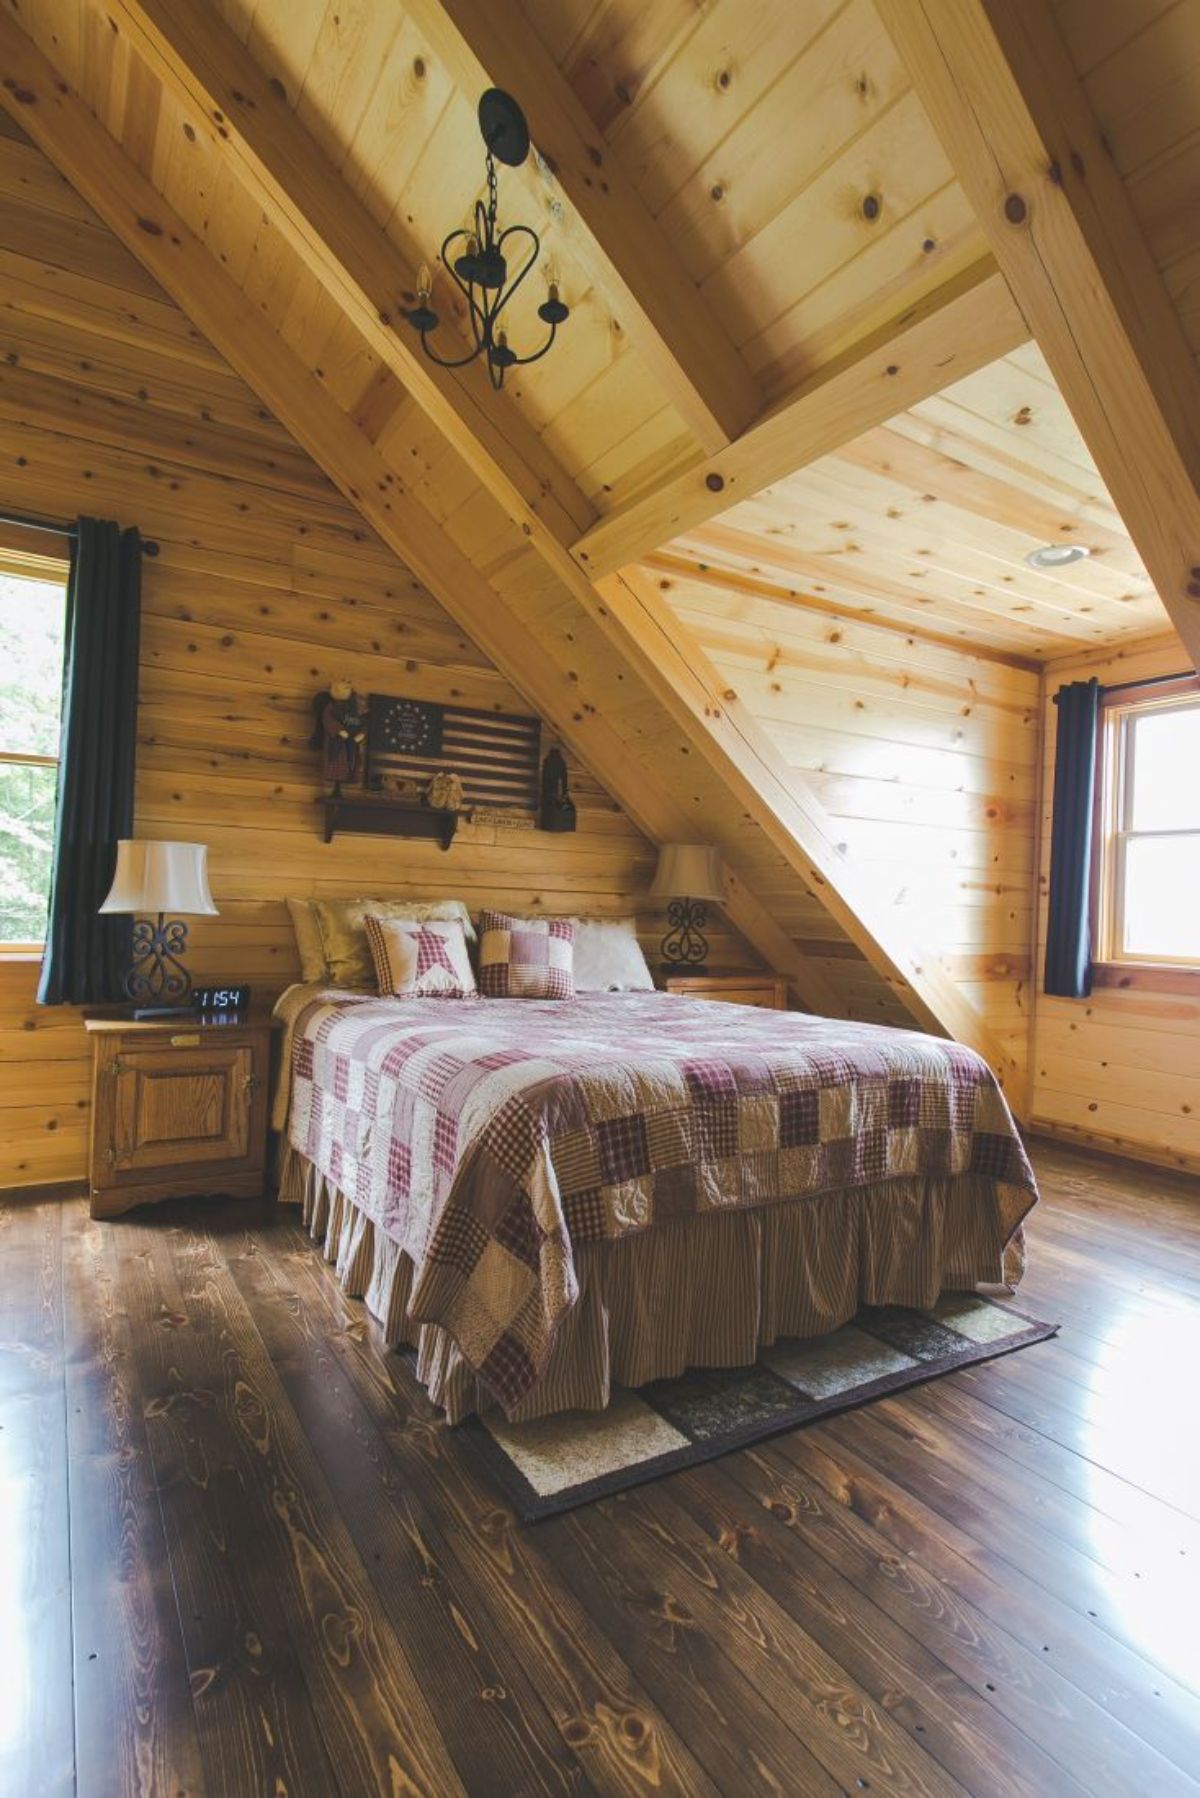 light clored bedding on bed against log cabin wall next to dormer window